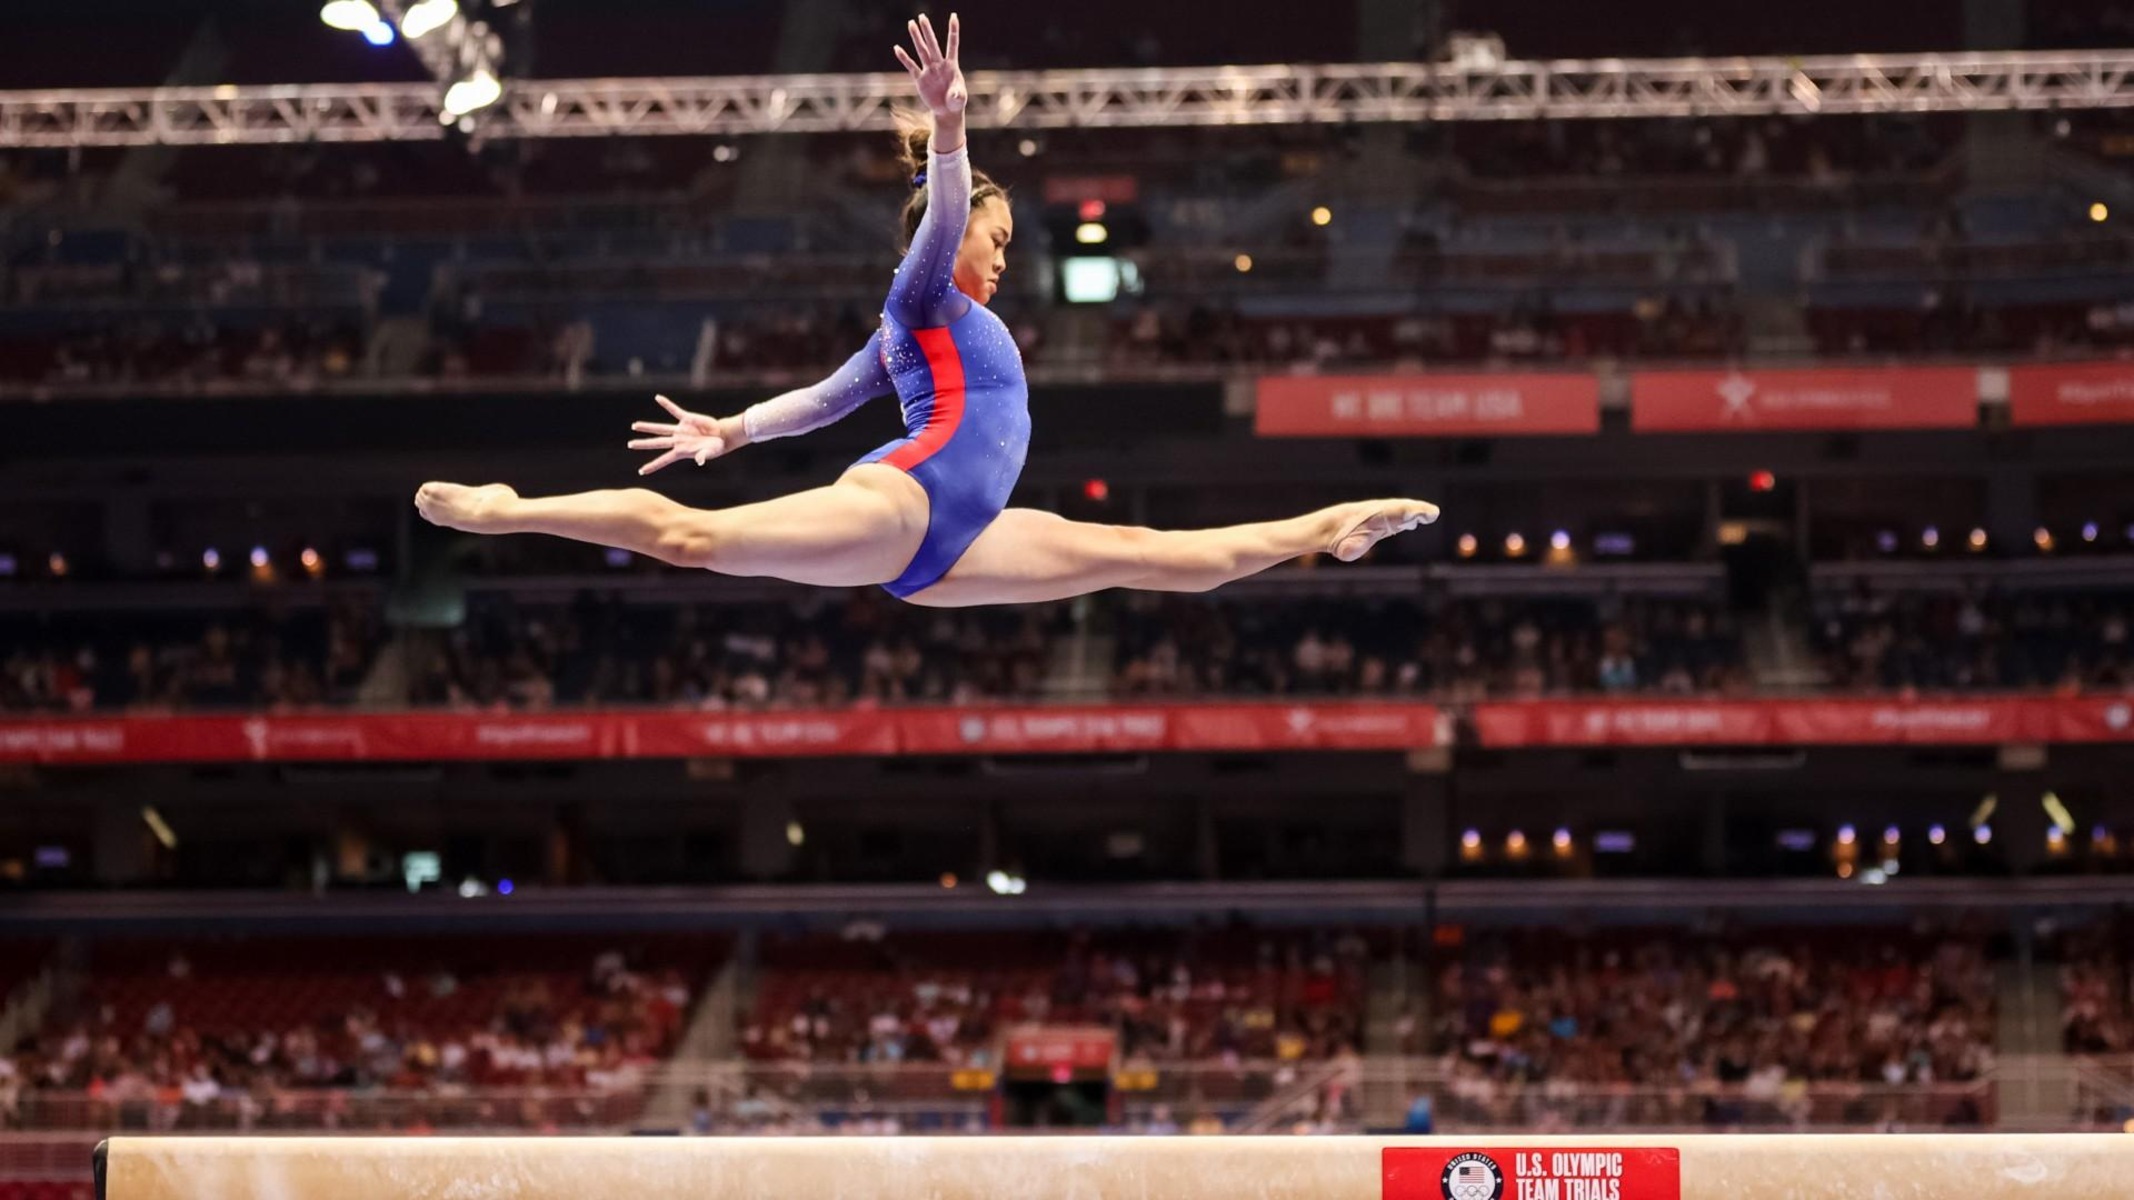 15-facts-about-american-cup-gymnastics